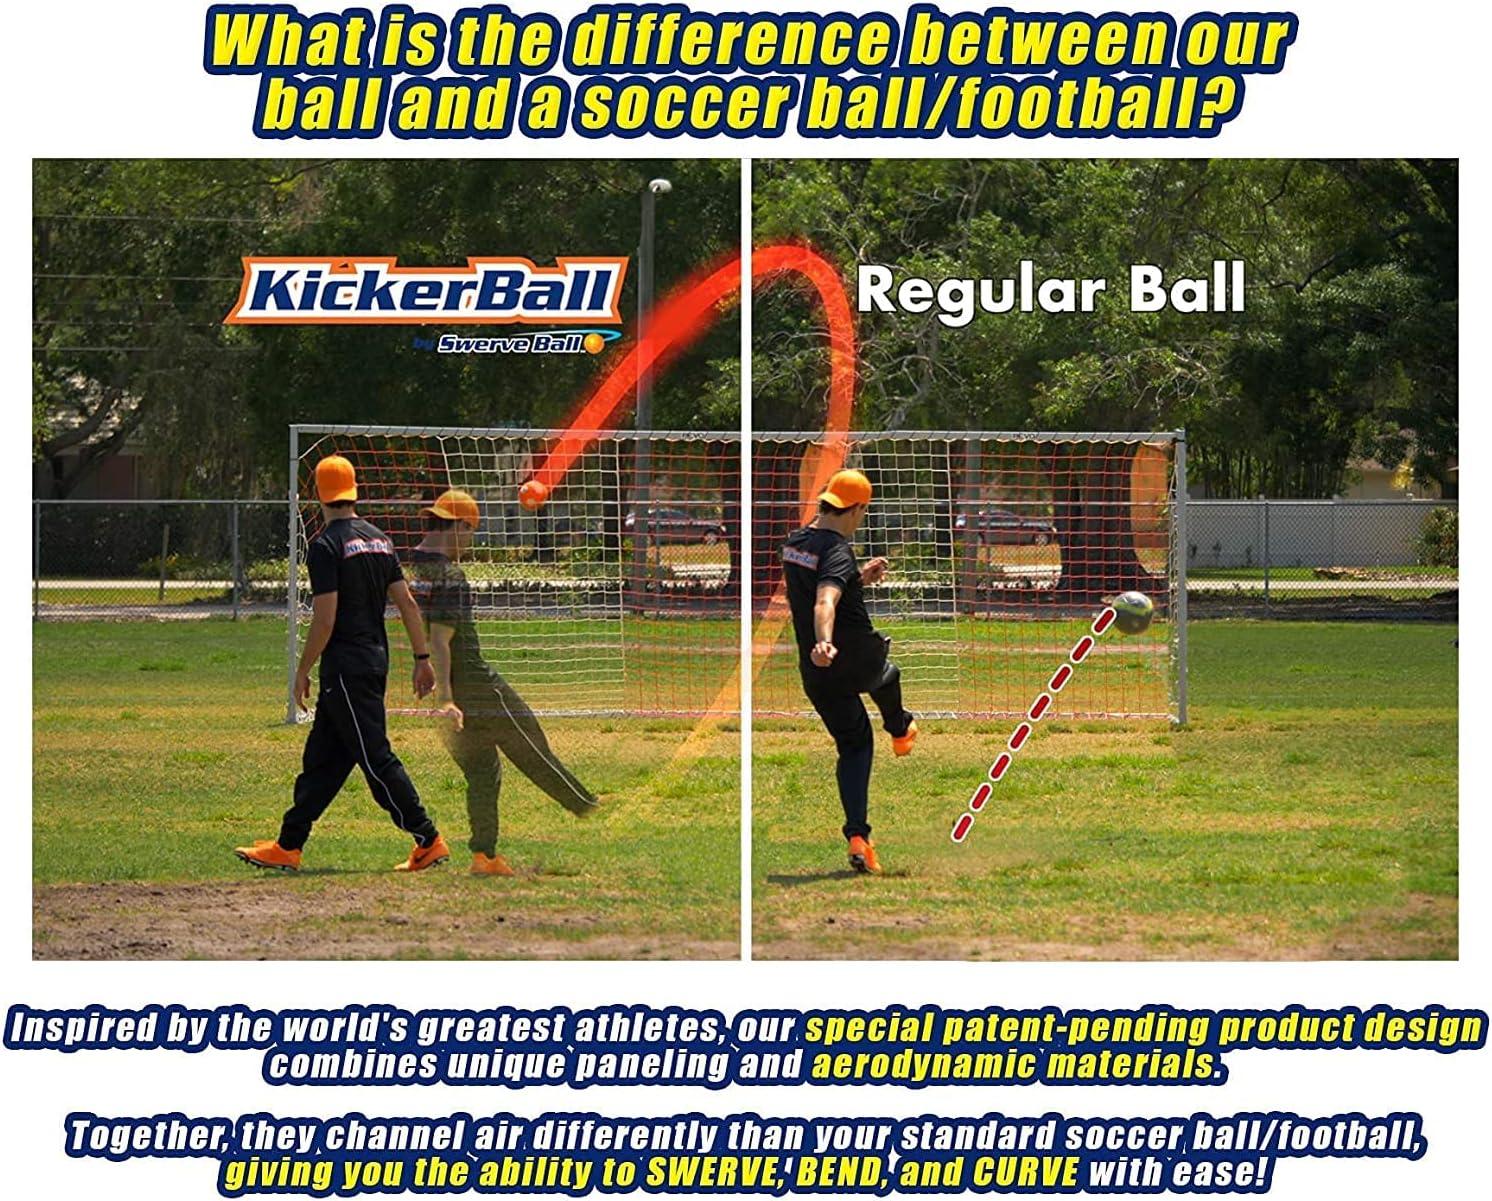 Does It Work? The KickerBall soccer ball